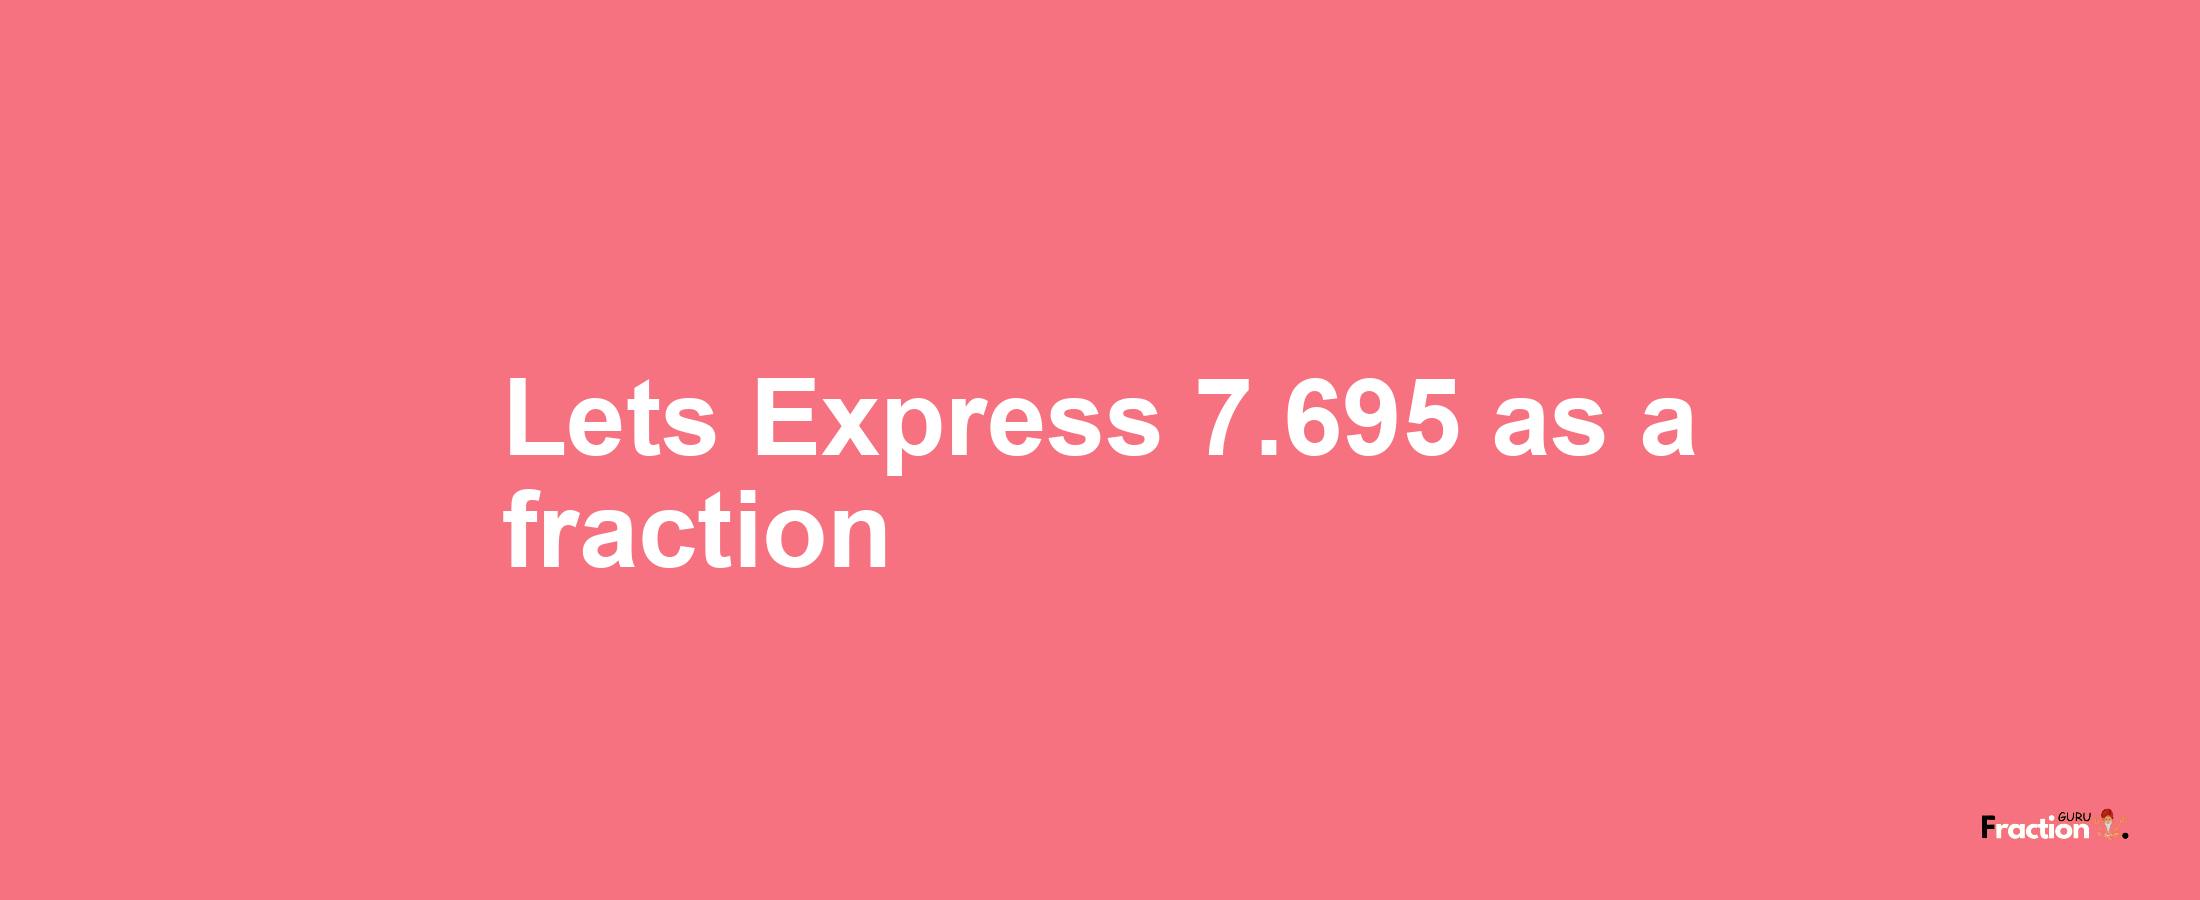 Lets Express 7.695 as afraction